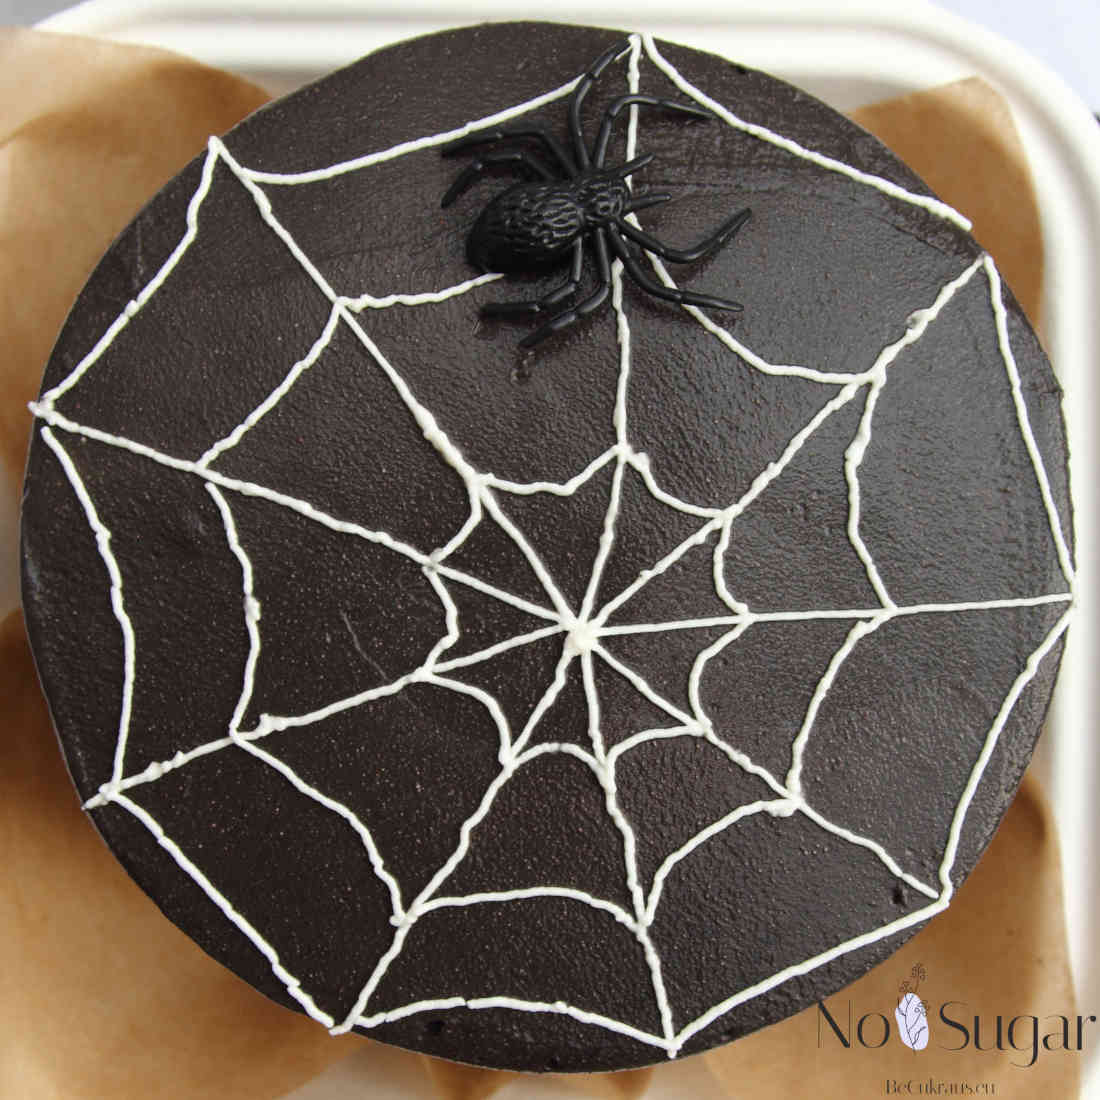 Spider on a Halloween themed cake